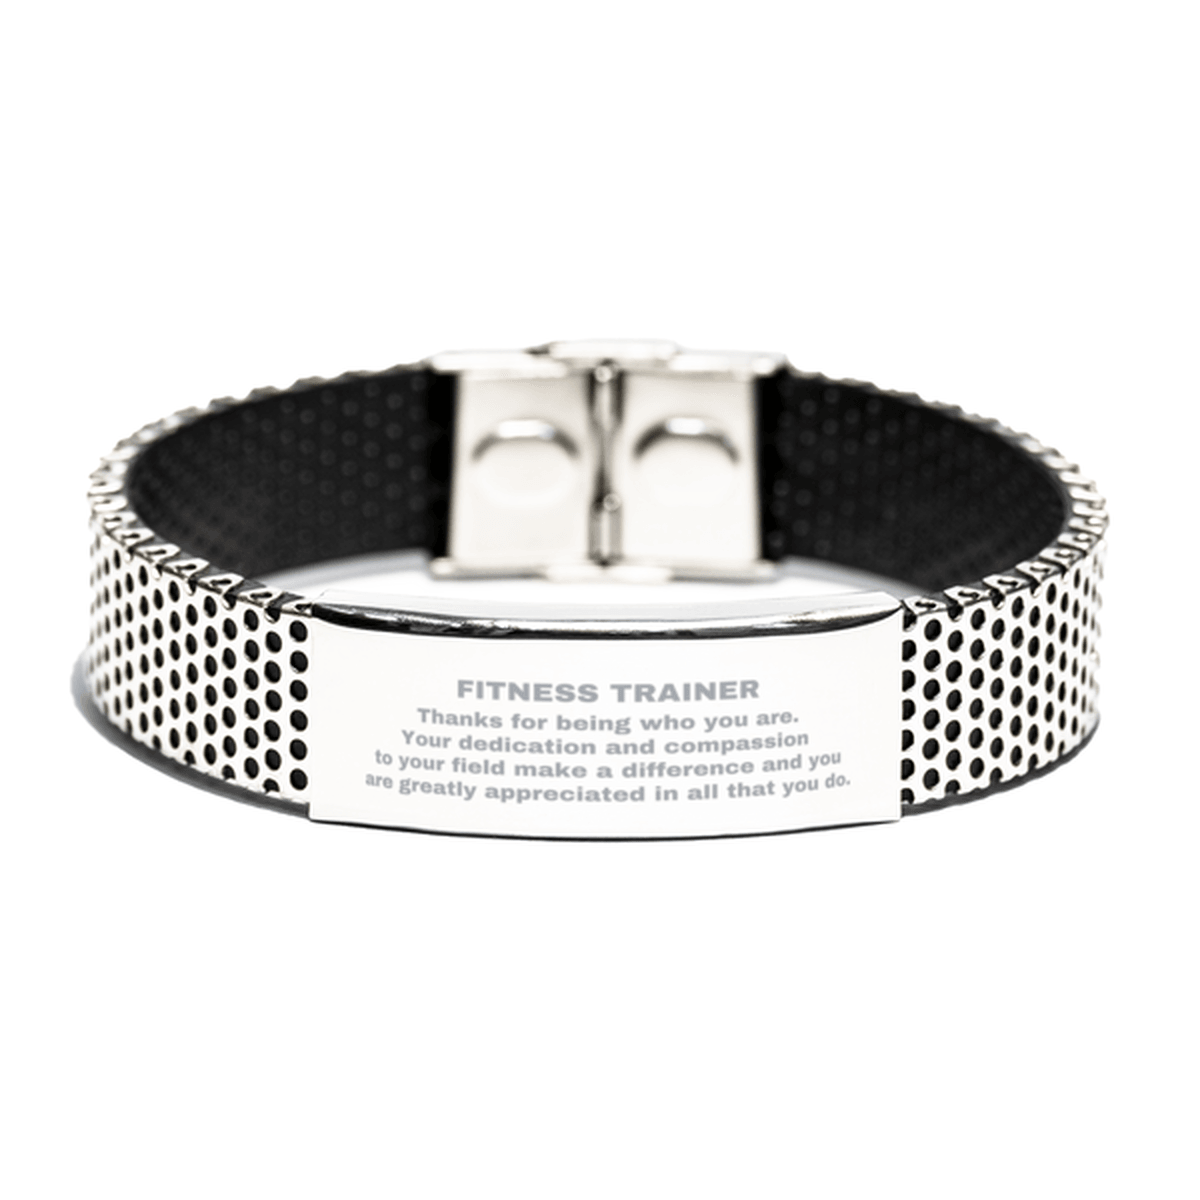 Fitness Trainer Silver Shark Mesh Stainless Steel Engraved Bracelet - Thanks for being who you are - Birthday Christmas Jewelry Gifts Coworkers Colleague Boss - Mallard Moon Gift Shop